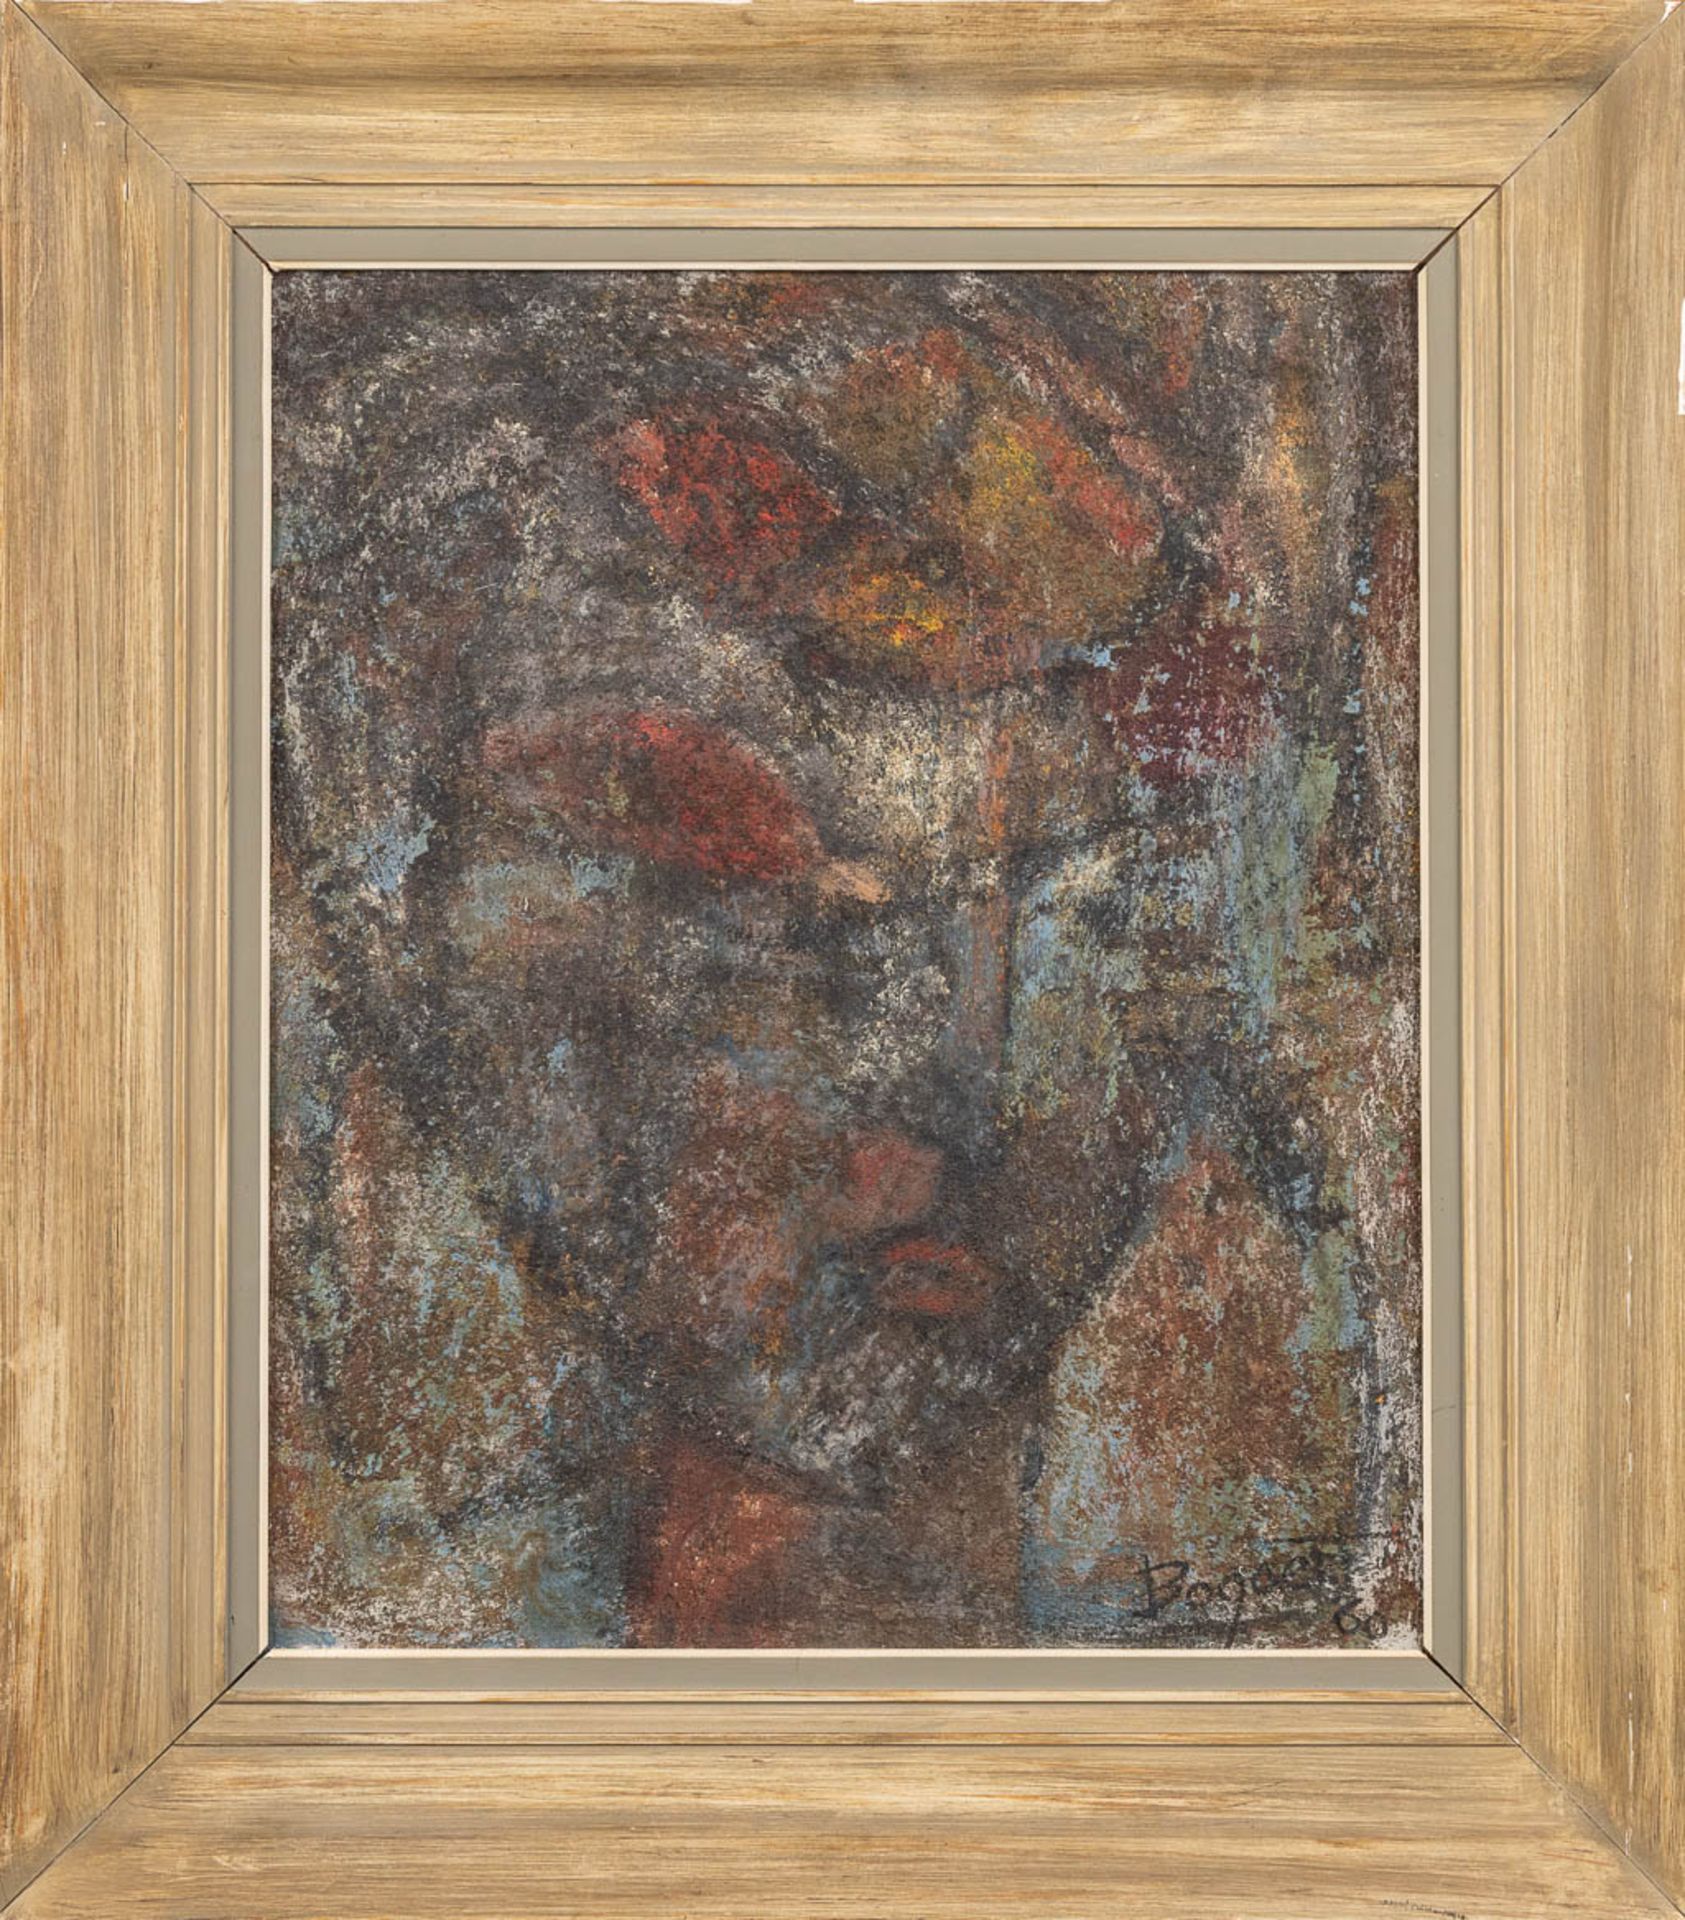 AndrŽ BOGAERT (1920-1986) 'Abstract figurine' oil on board. 1960. (W:50 x H:60 cm) - Image 3 of 6